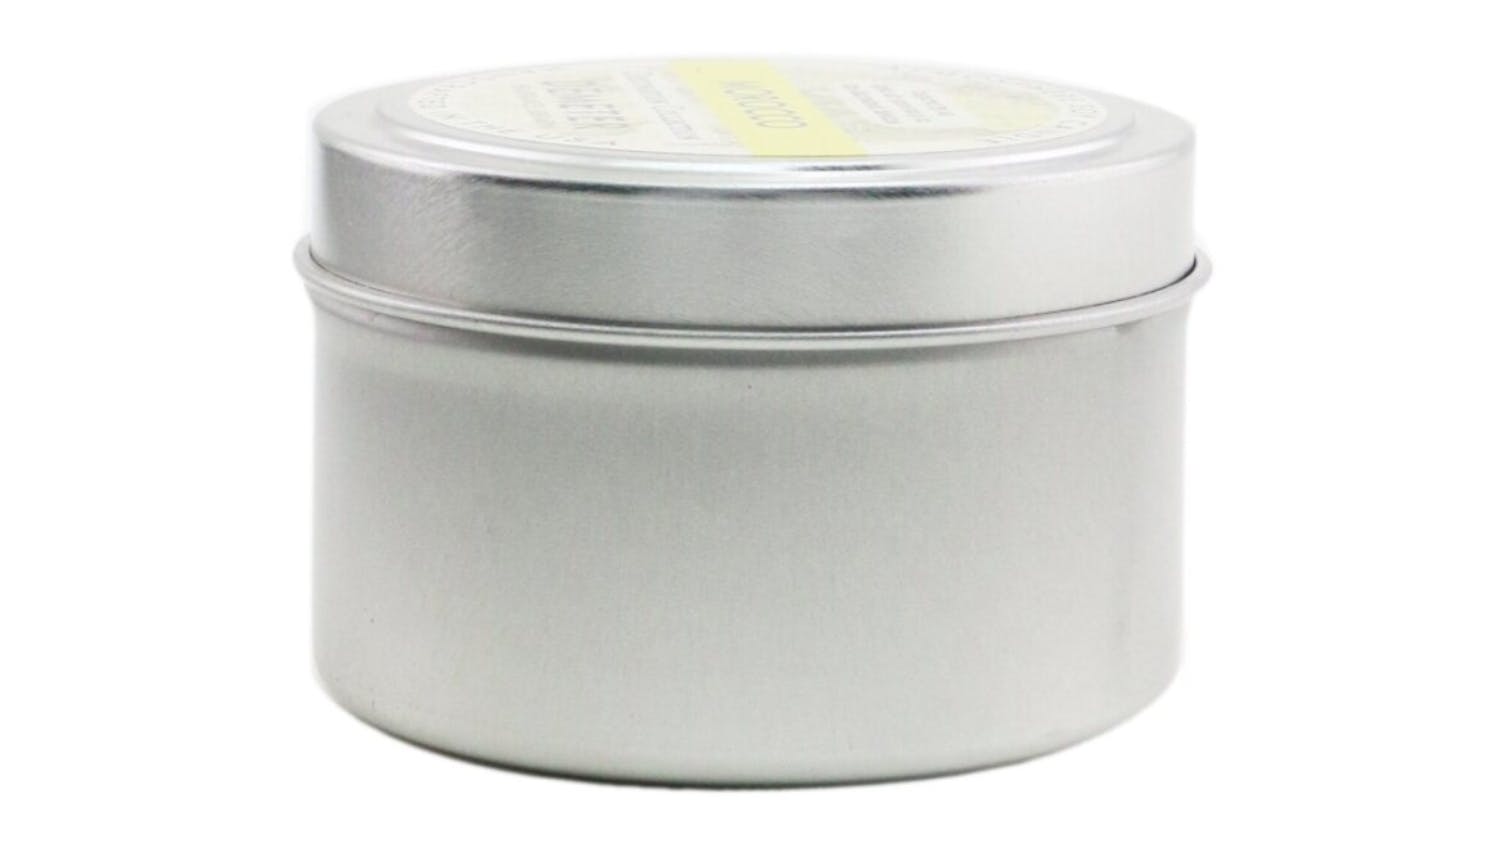 Demeter Atmosphere Soy Candle - Morocco - 170g/6oz